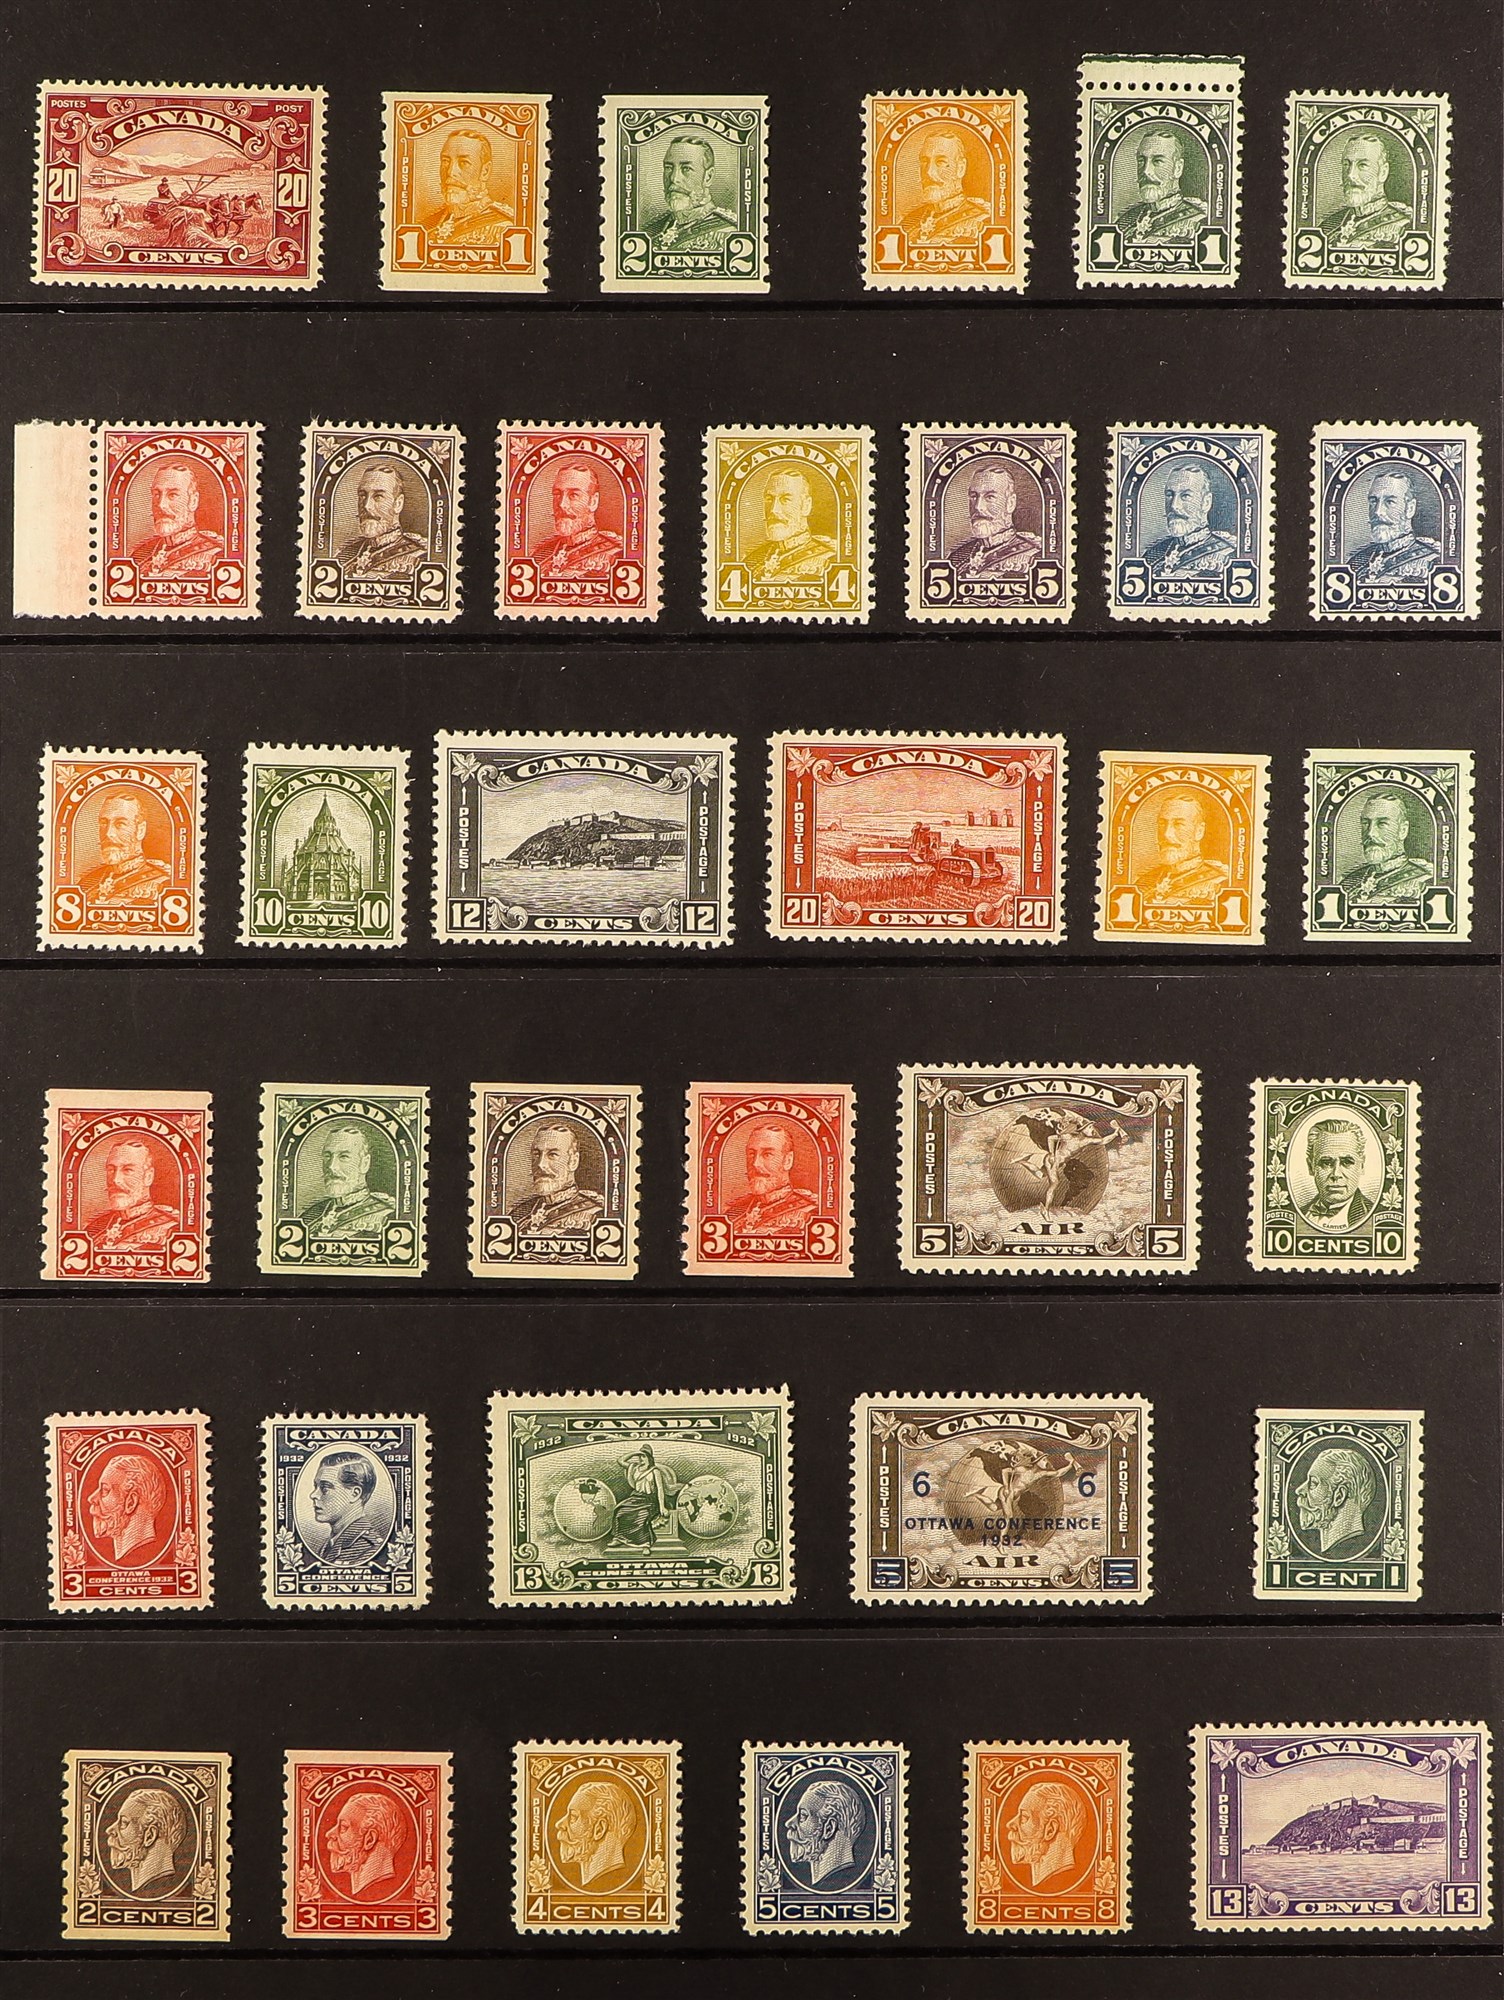 CANADA 1911-35 MINT COLLECTION incl. 1911-22 Admirals incl. 5c (2 shades), 7c (2 shades) and 2c perf - Image 2 of 3